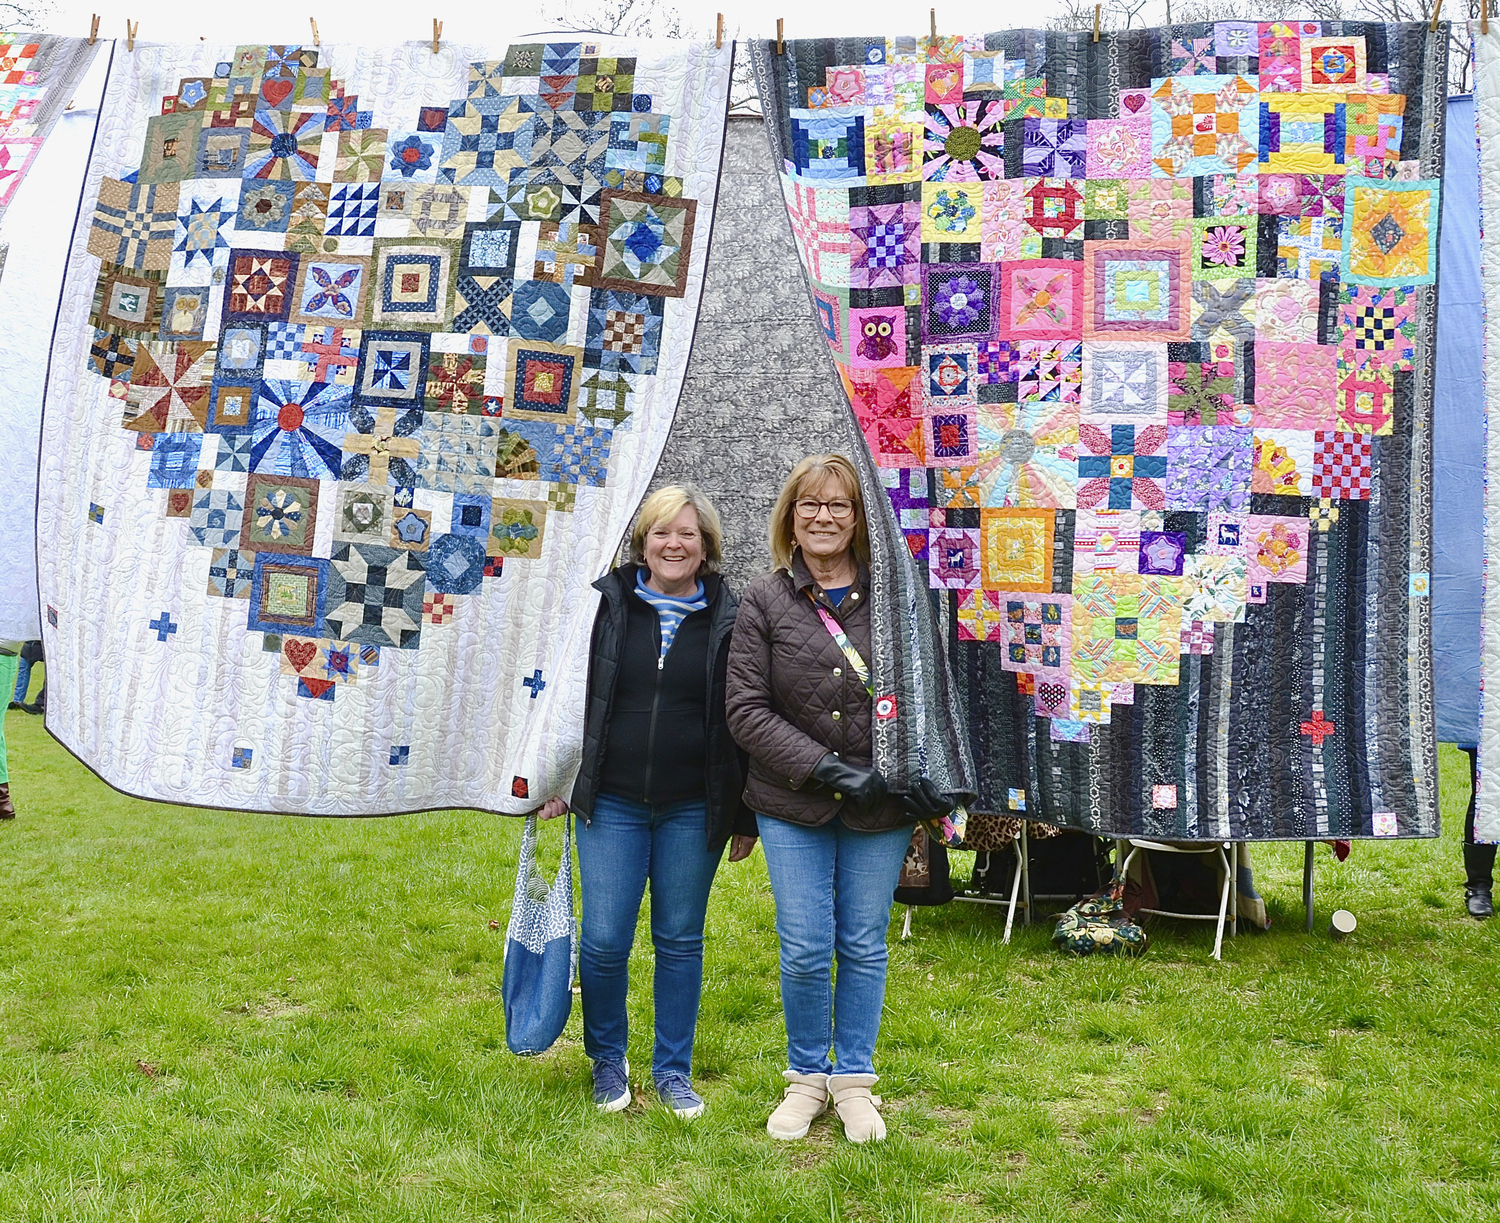 Karen Nicholson and Donna Daley at the Airing of Quilts on Saturday at the Arts Center at Duck Creek in Springs. The event was organized by Louise Eastman and Erica-Lynn Huberty and featured. among others, a bedspread made by Stella Mae McClure Pollock, crafted from Jackson Pollock’s clothing and a quilt by one of Gee’s Bend’s renowned quilters, Leola Pettway.   KYRIL BROMLEY